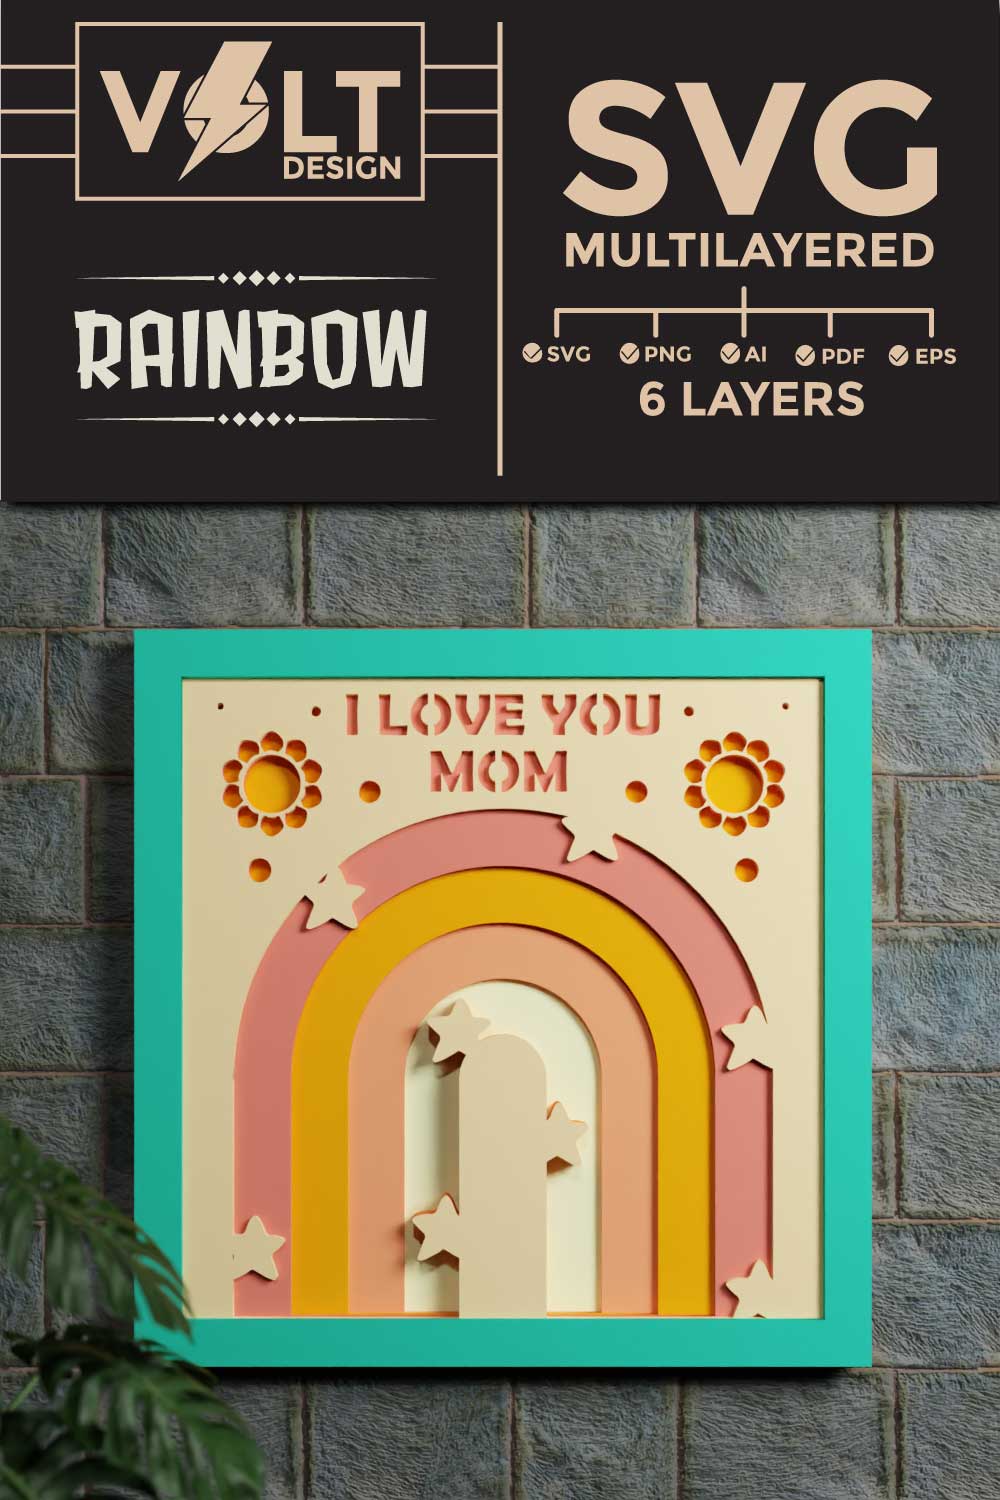 Rainbow 3D SVG Multilayered Cut files pinterest preview image.